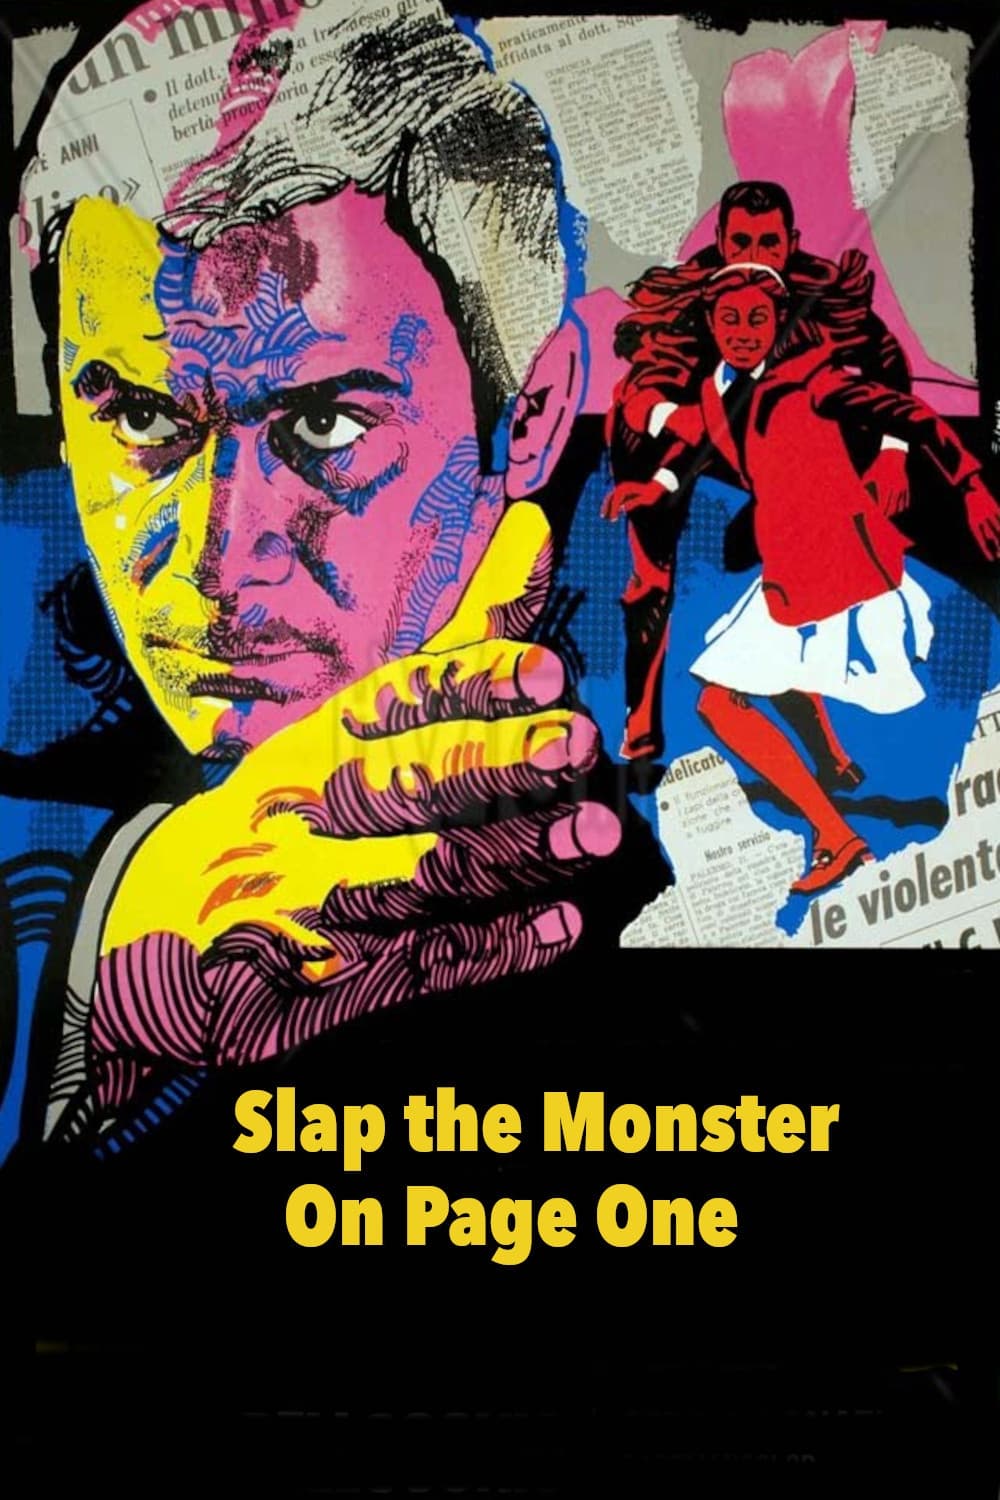 Slap the Monster on Page One (1972)